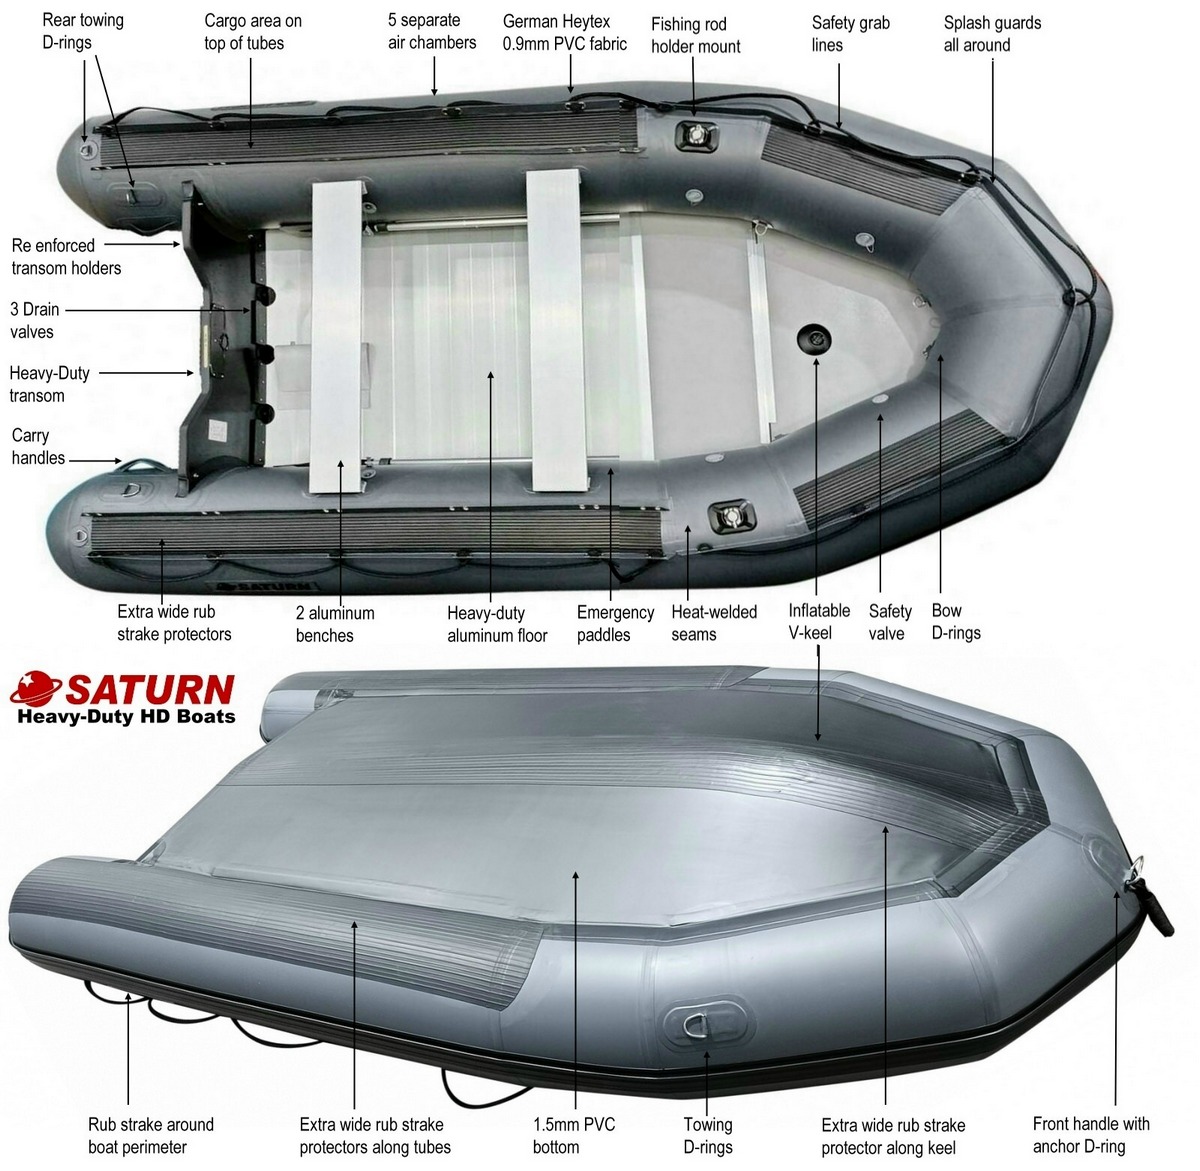 Saturn HD385 Heavy-Duty Inflatable Boat Specifications